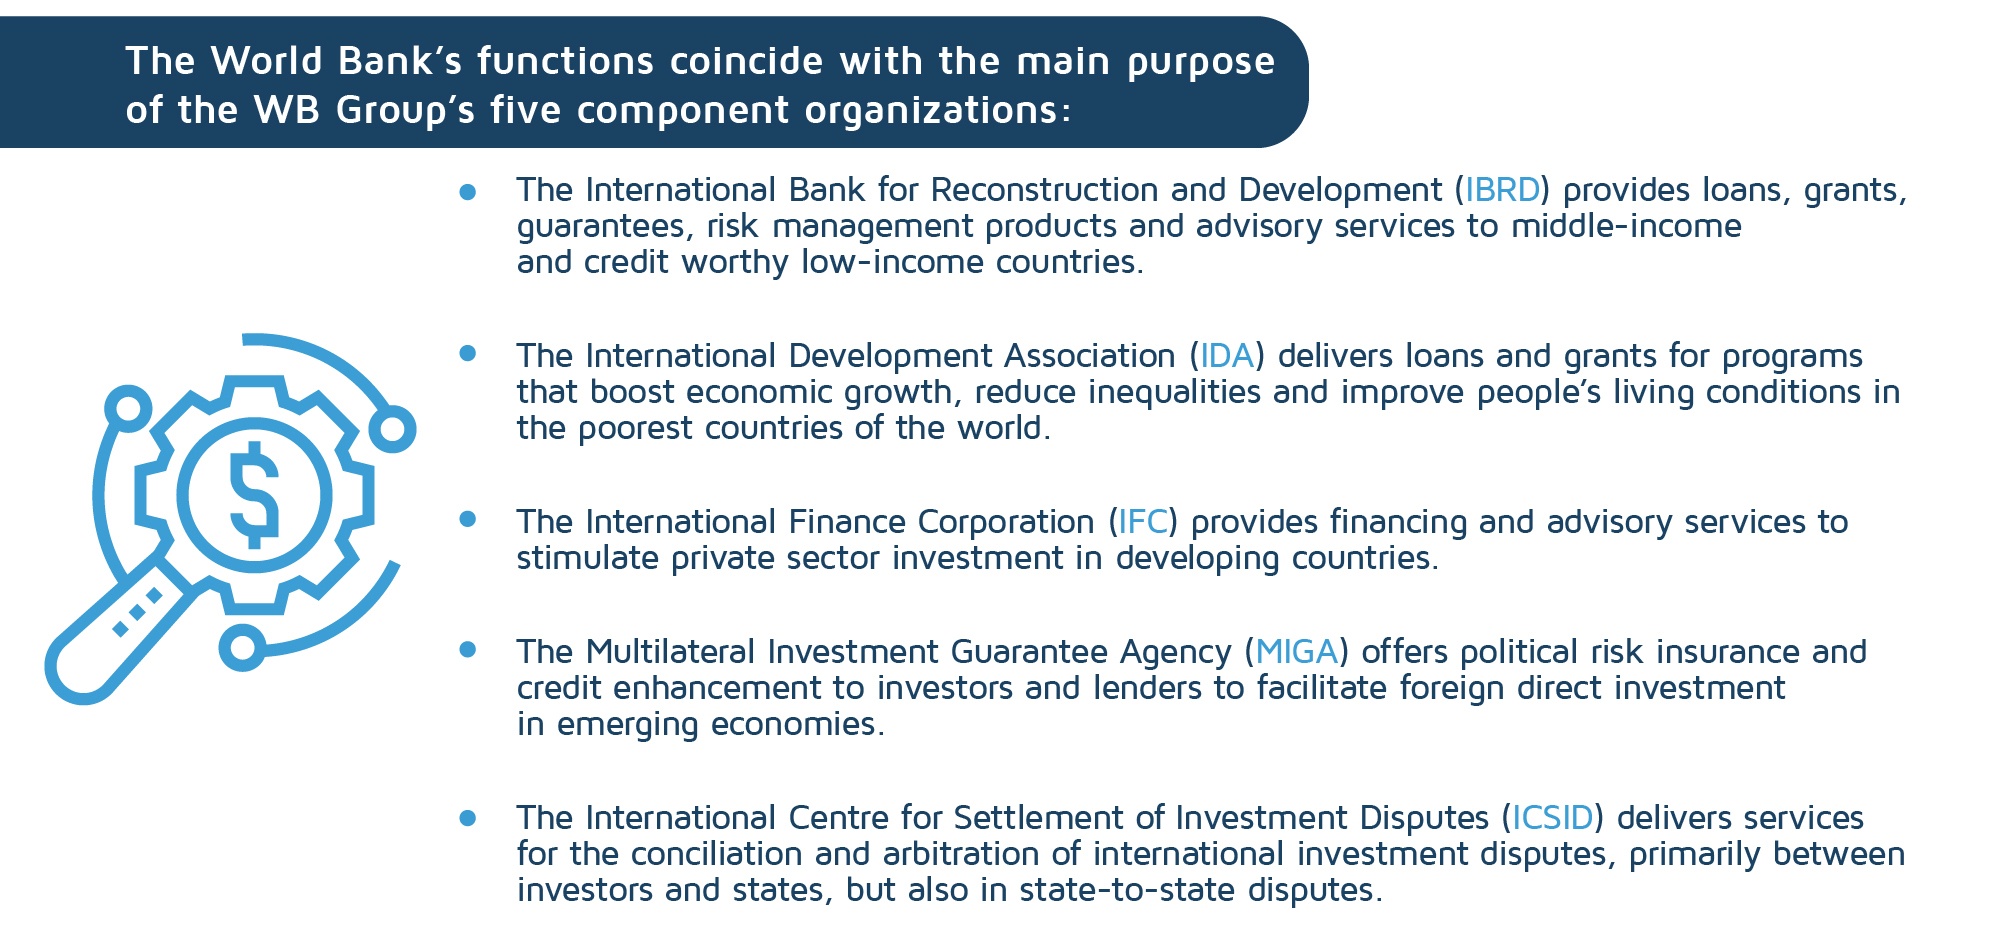 The functions of the World Bank